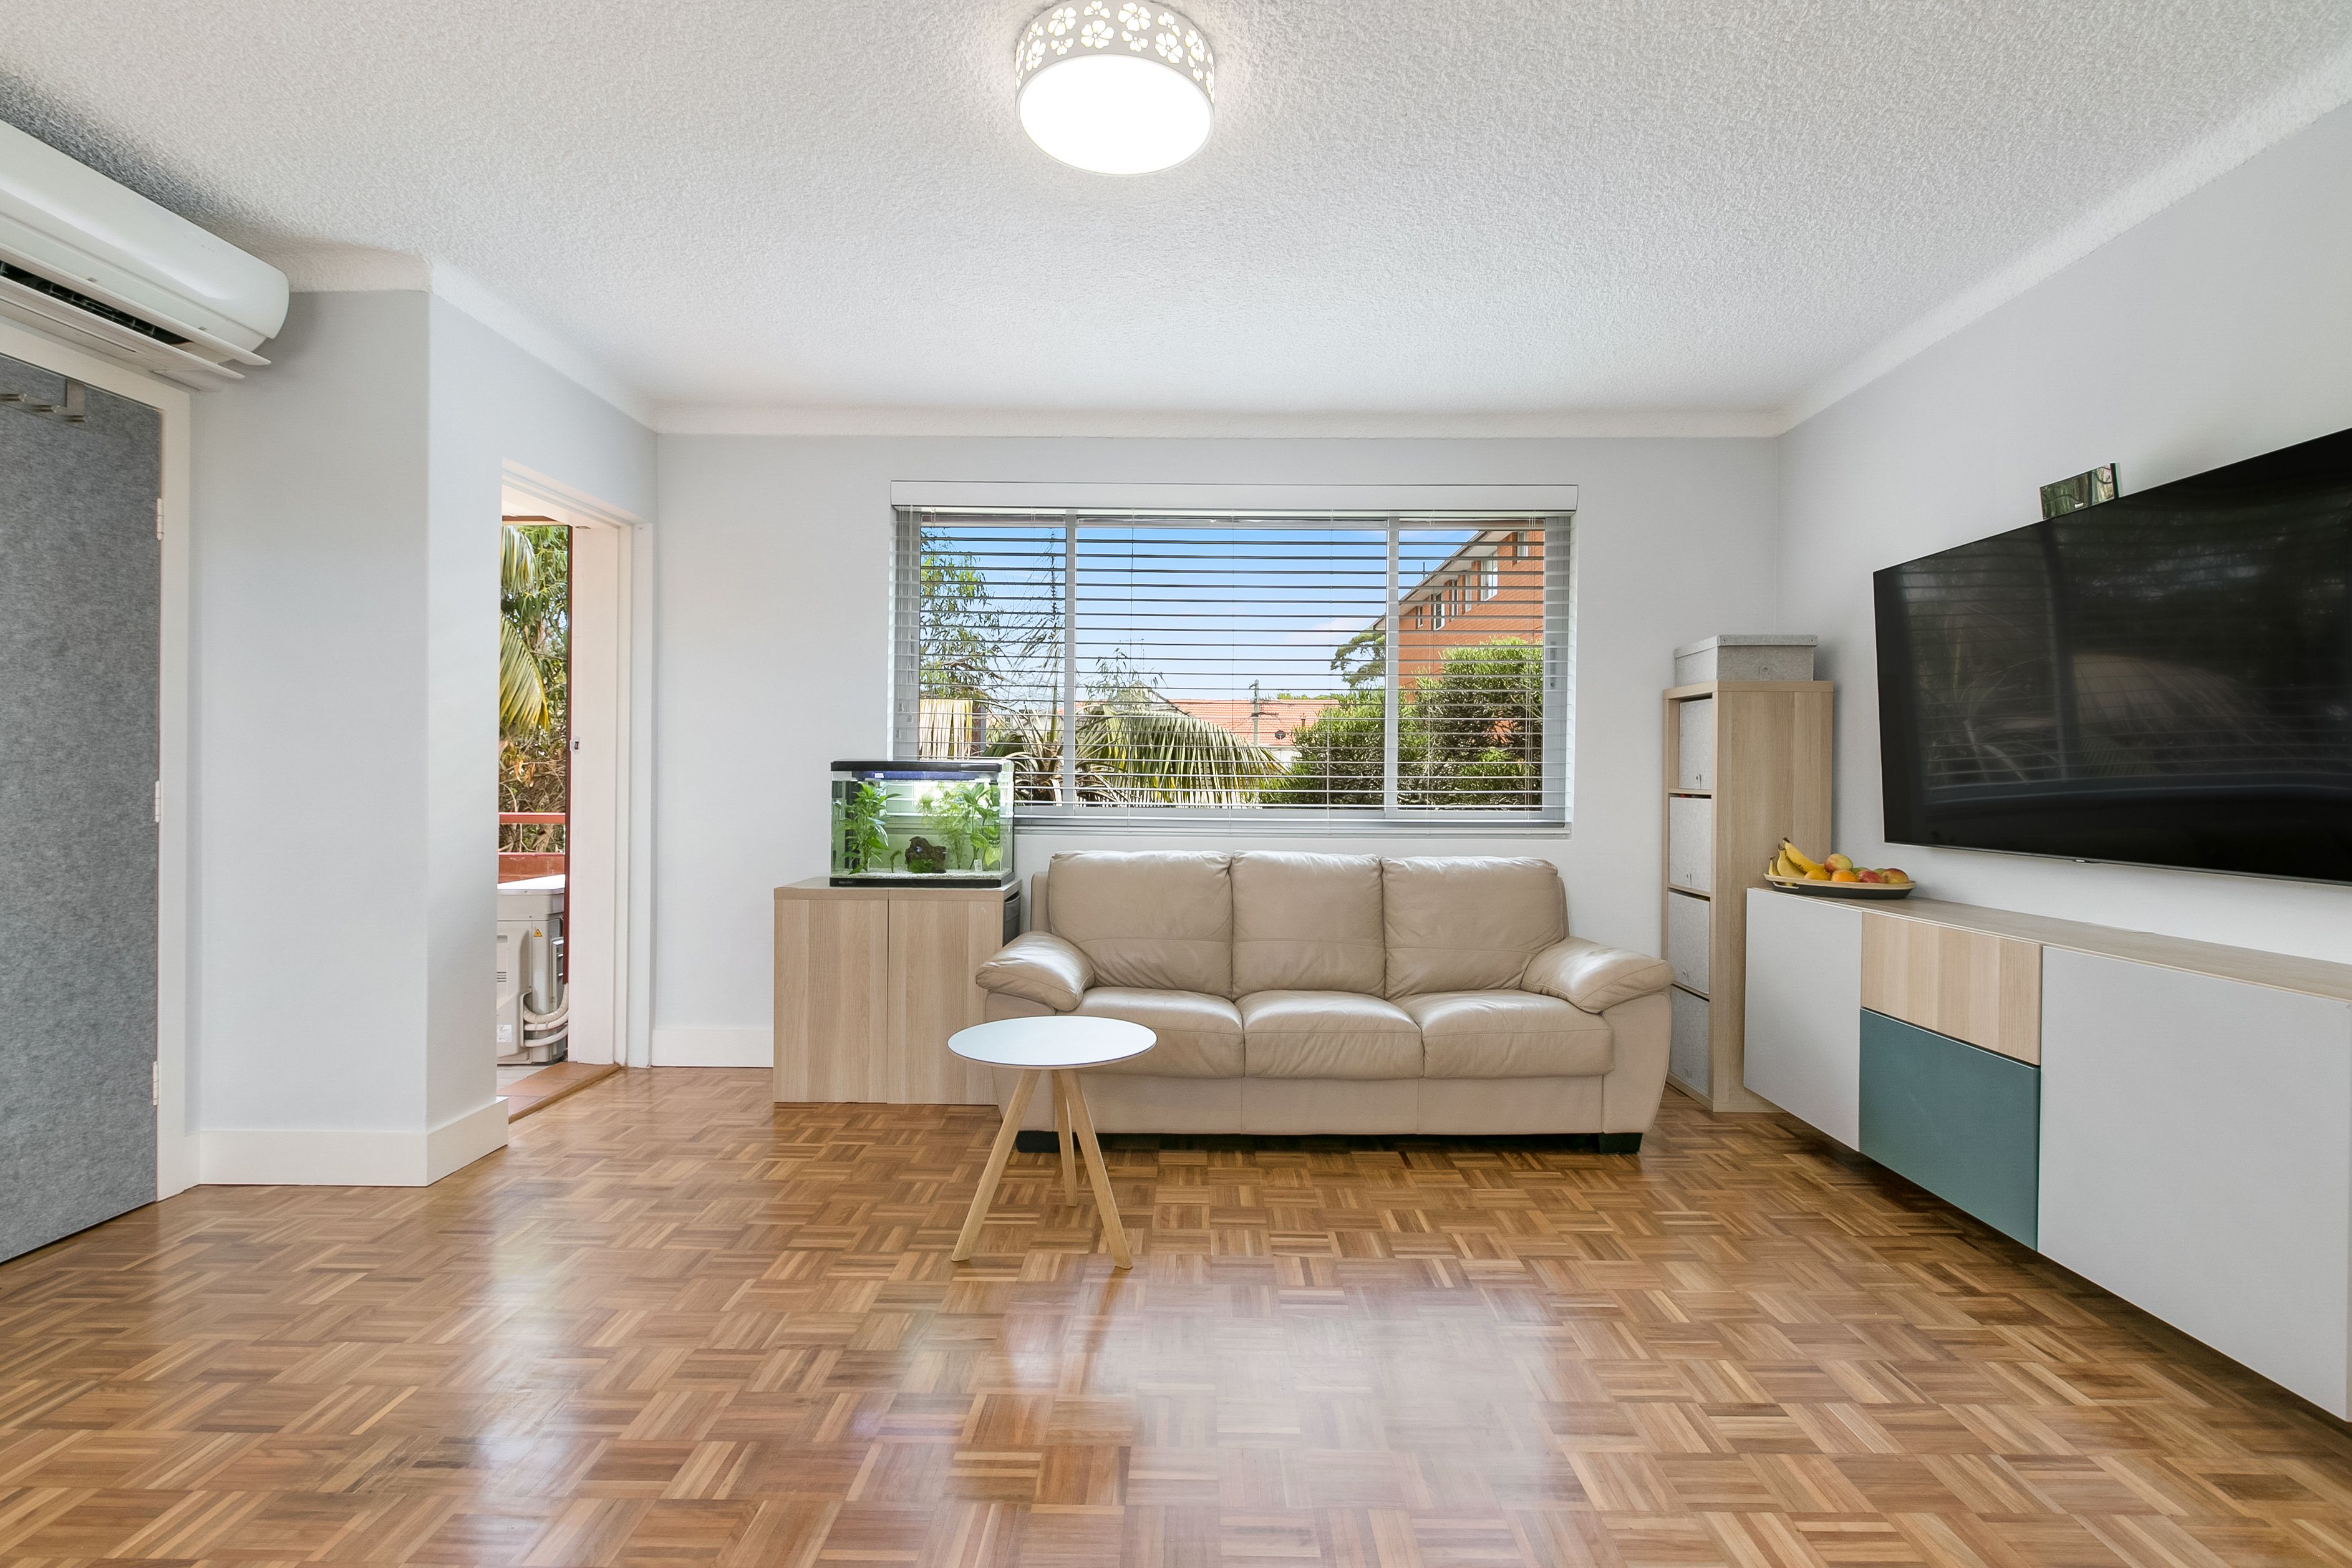 Leased Apartment 9/73 Arden Street, Coogee NSW 2034 - Jul 11, 2022 - Homely